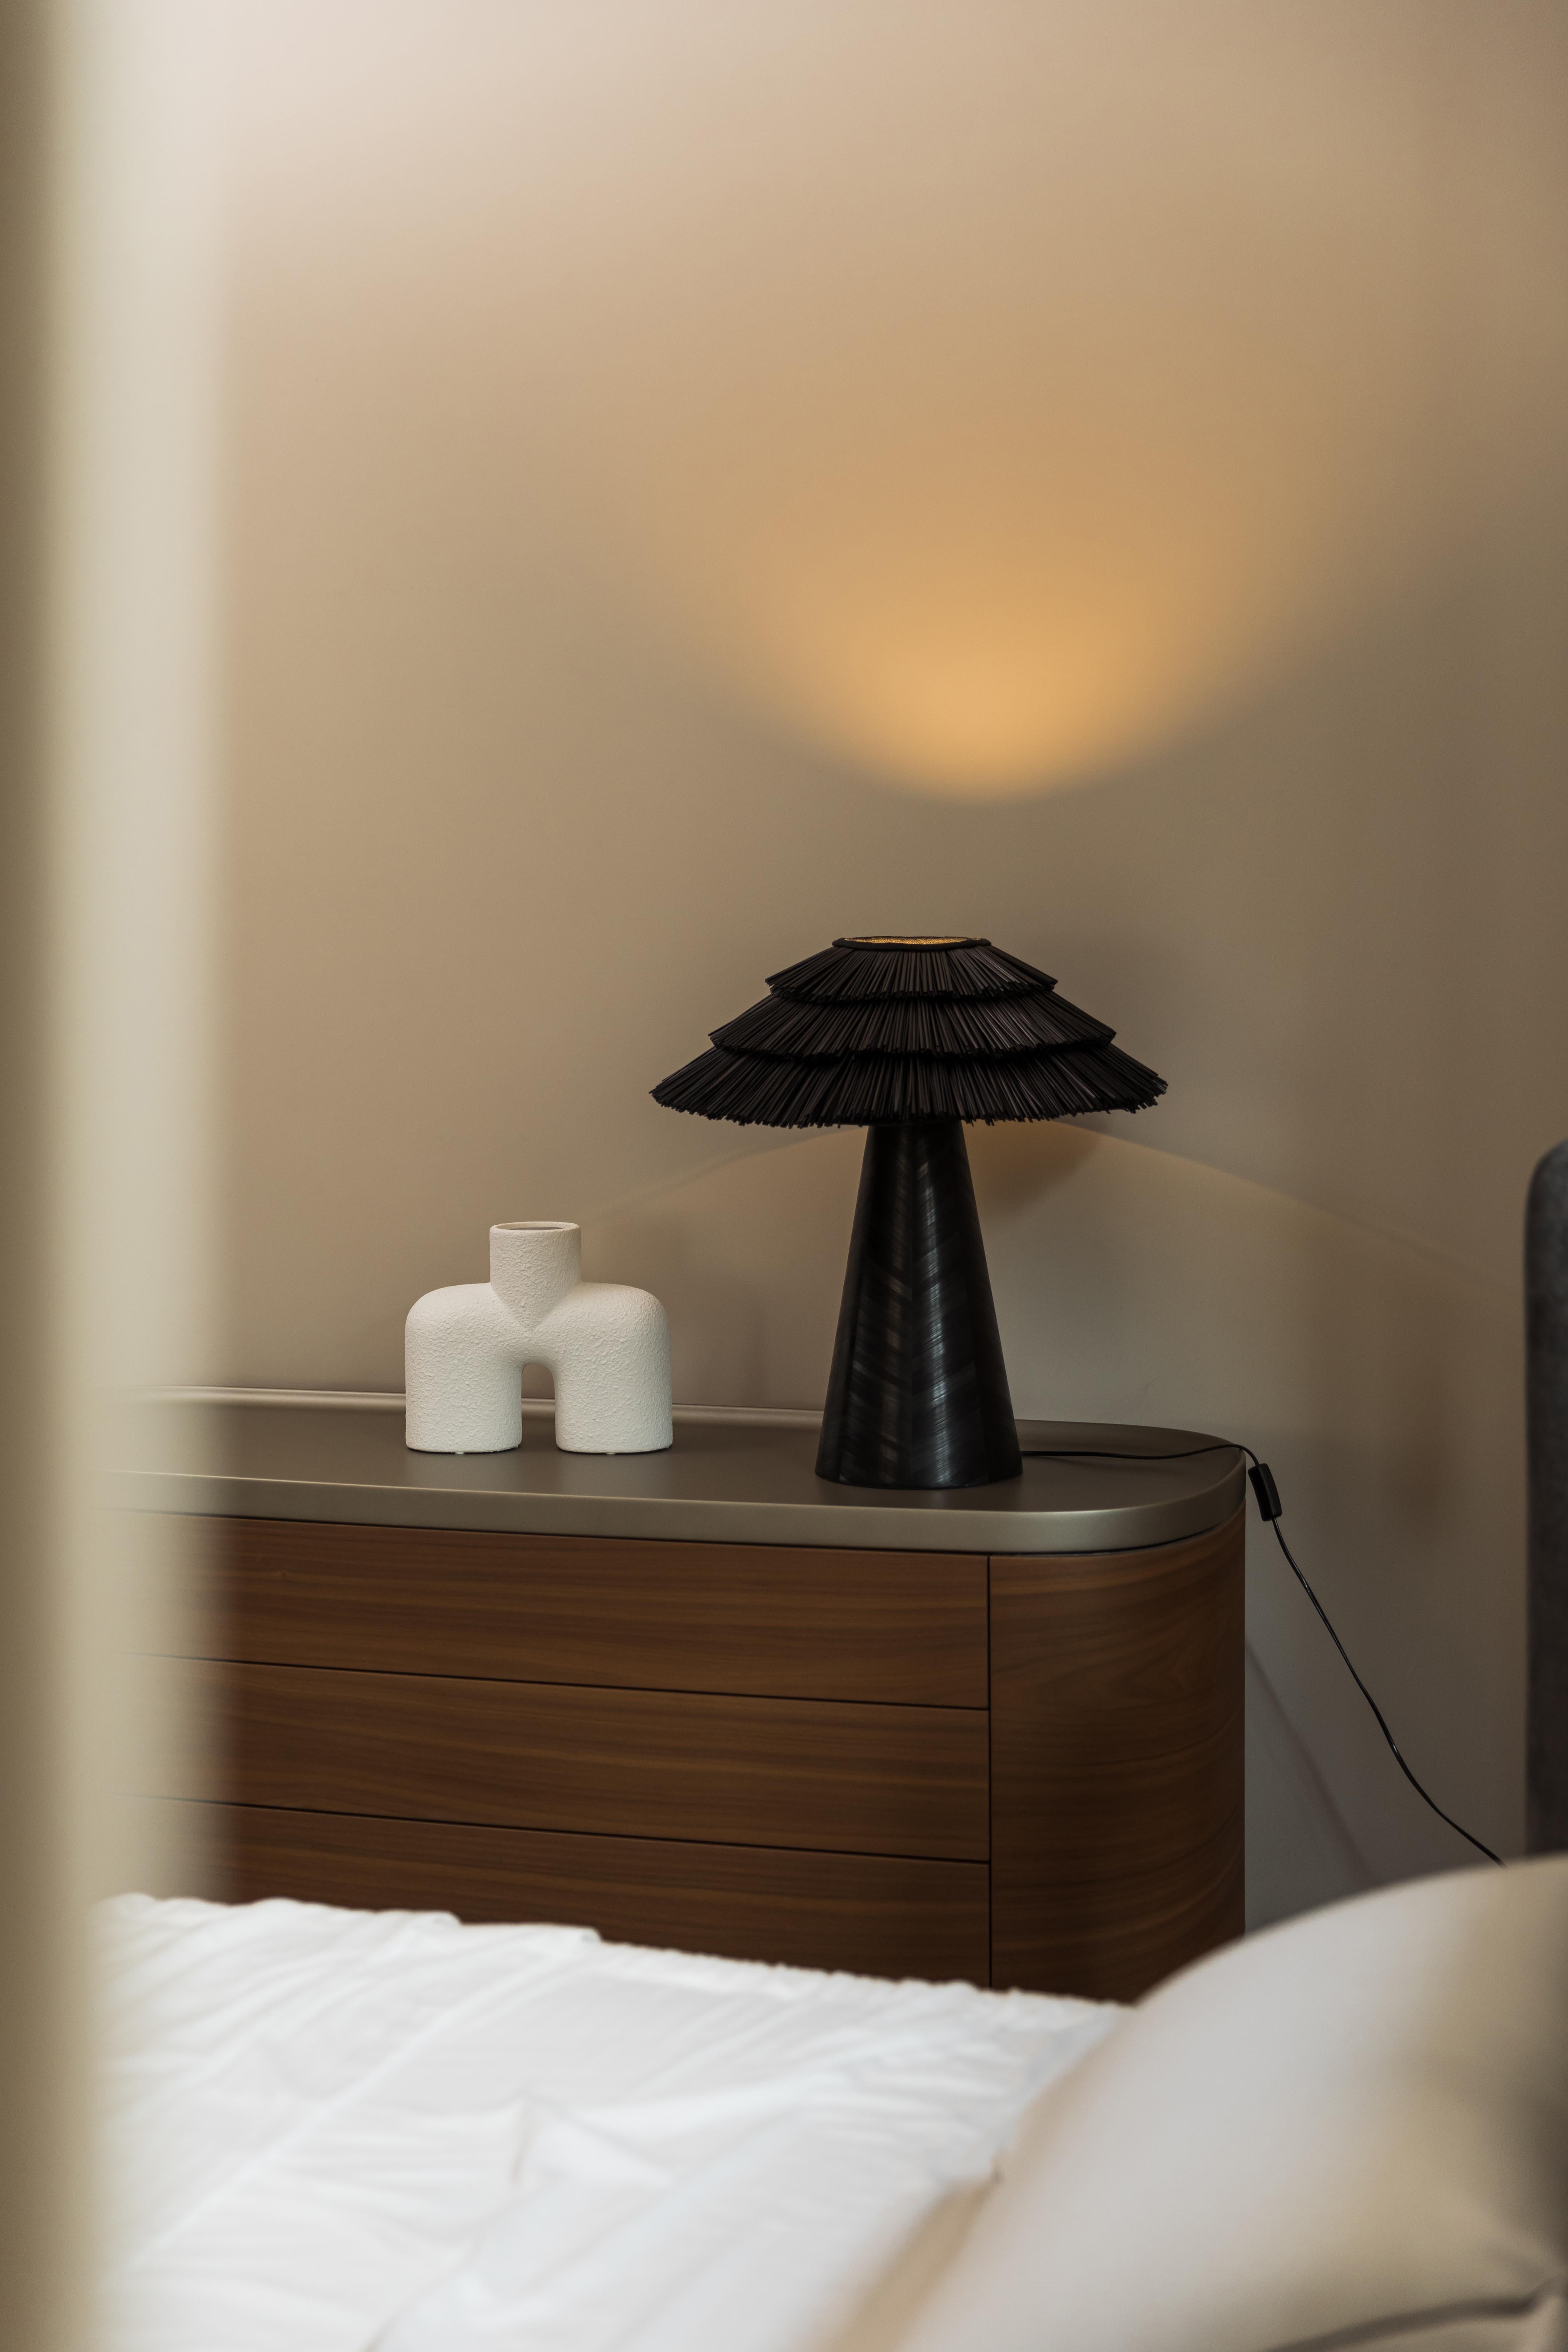 Other Roots Of Home Medium Table Lamp by Ruda Studio For Sale